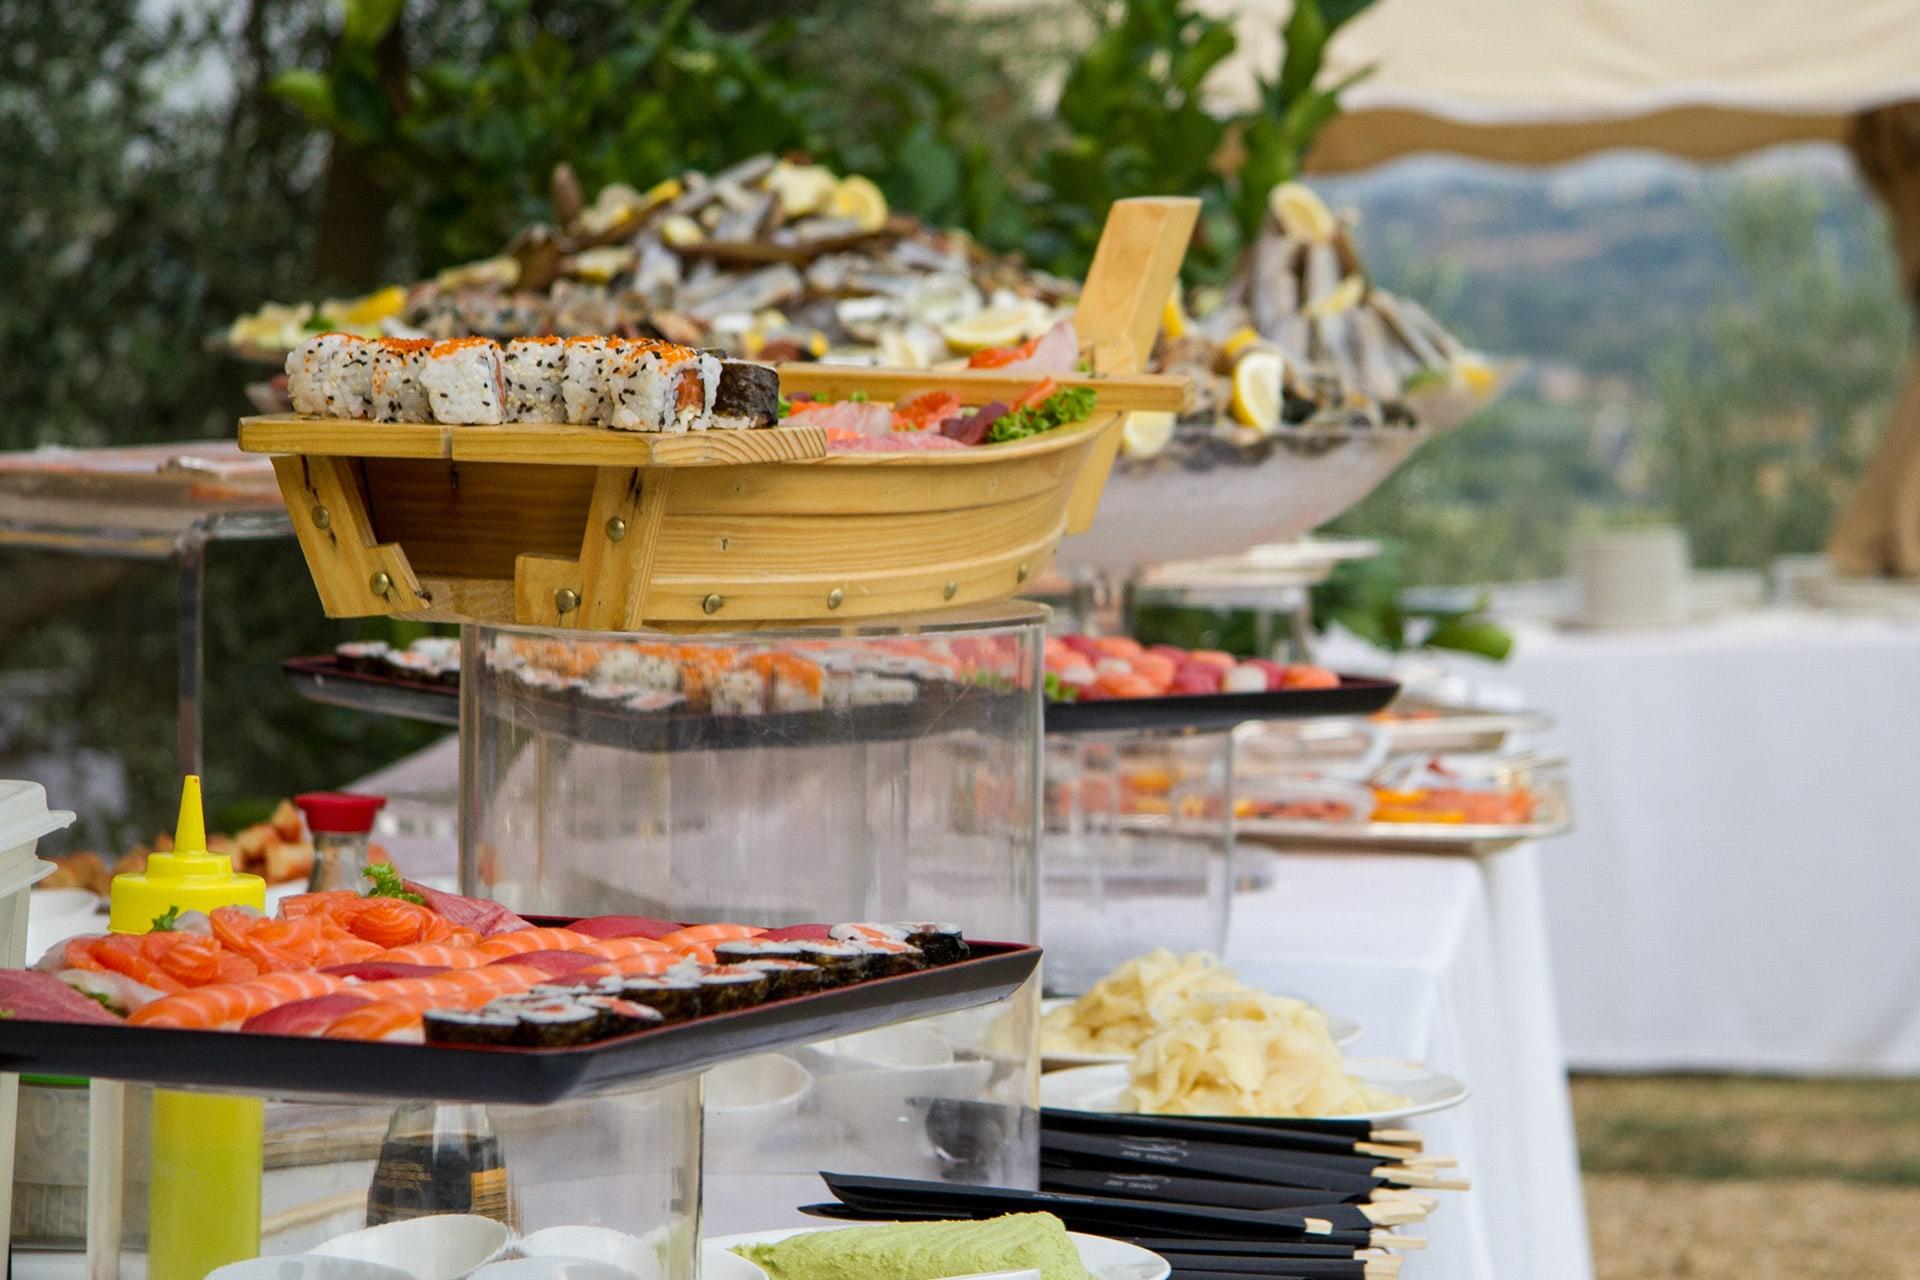 Gourmet cuisine by Preludio Catering. Chefs for your special events